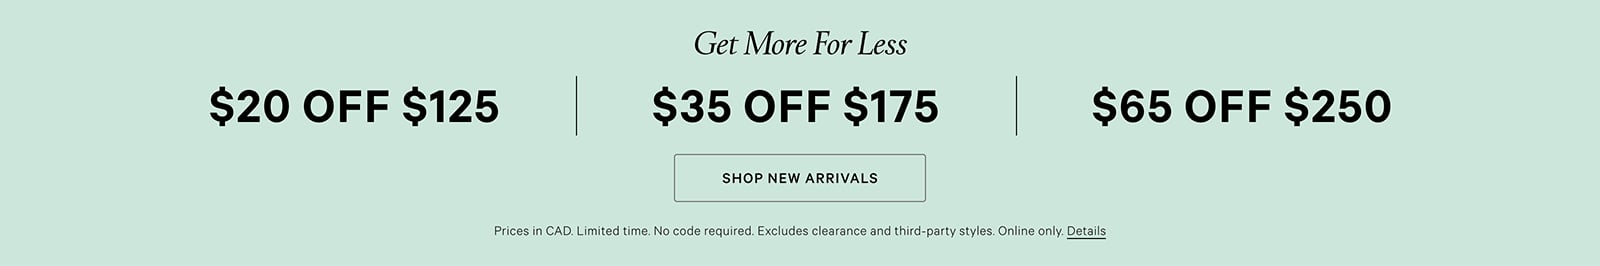 Get more for less. CAD $20 off CAD $125 , CAD $35 off CAD $175, CAD $65 off CAD $250. Limited time. No code required. Excludes clearance and third-party styles. Online Only. Click for details. Click to shop new arrivals.